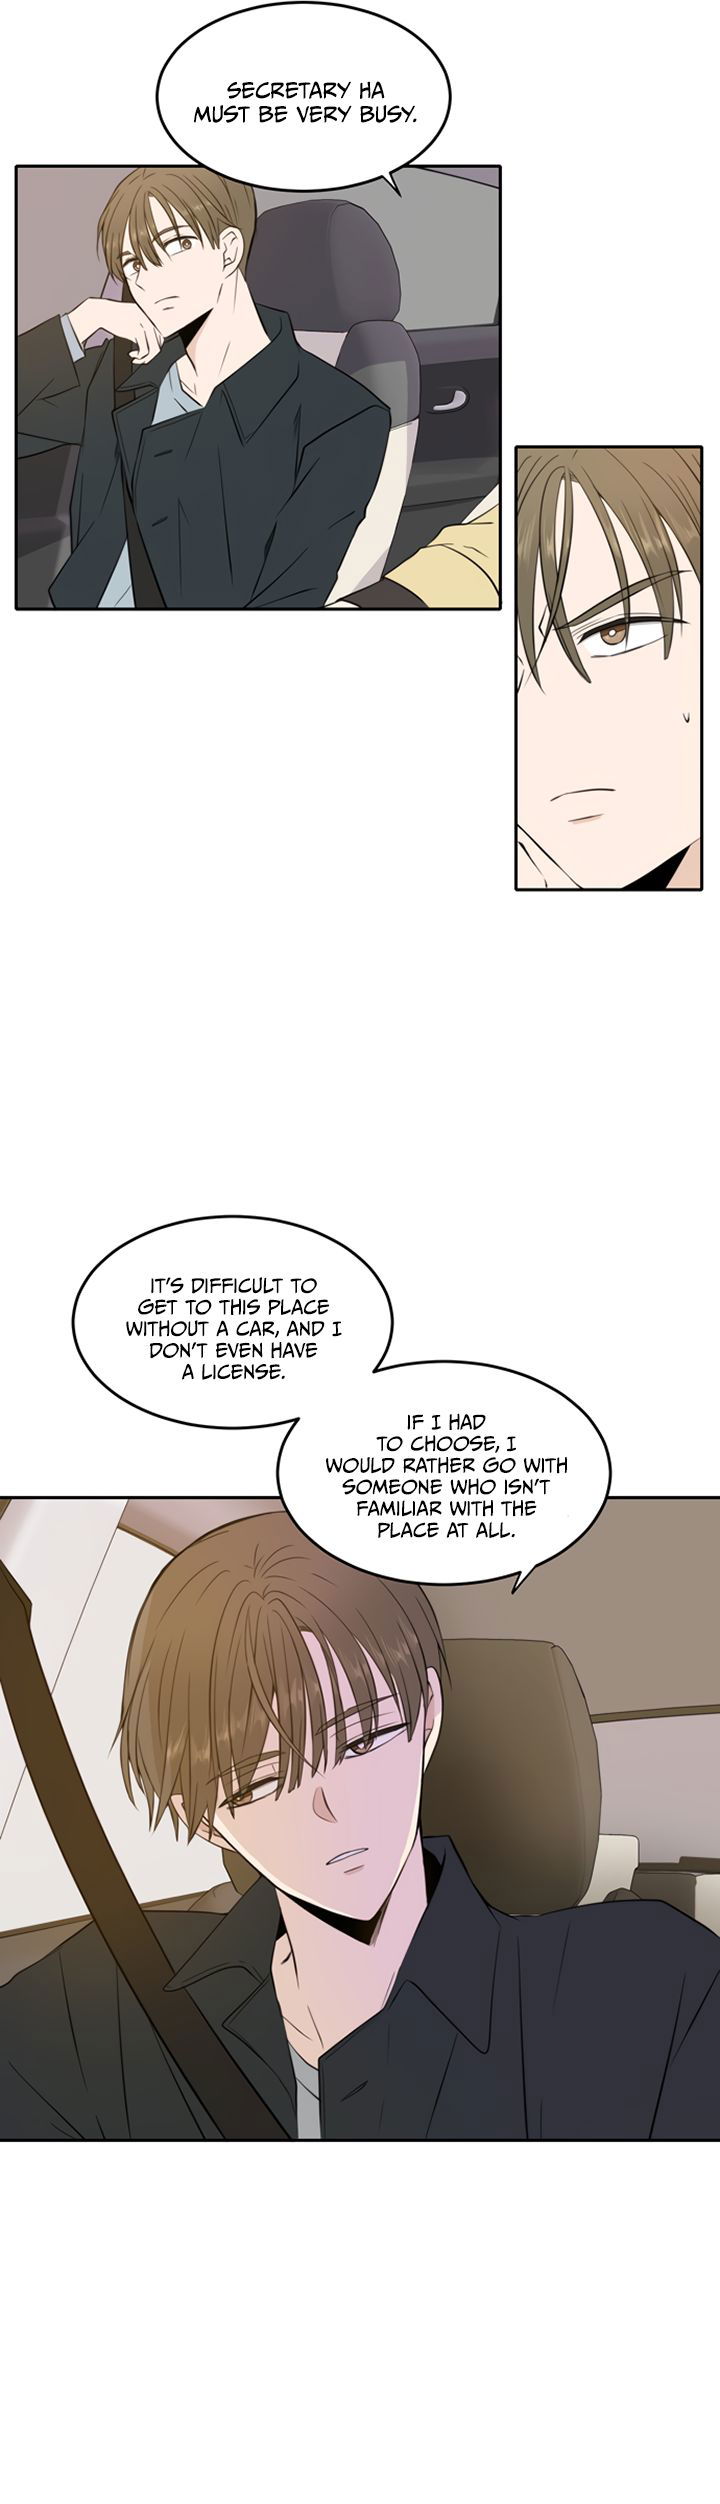 Please Take Care of Me in This Life as Well Chapter 13 page 5